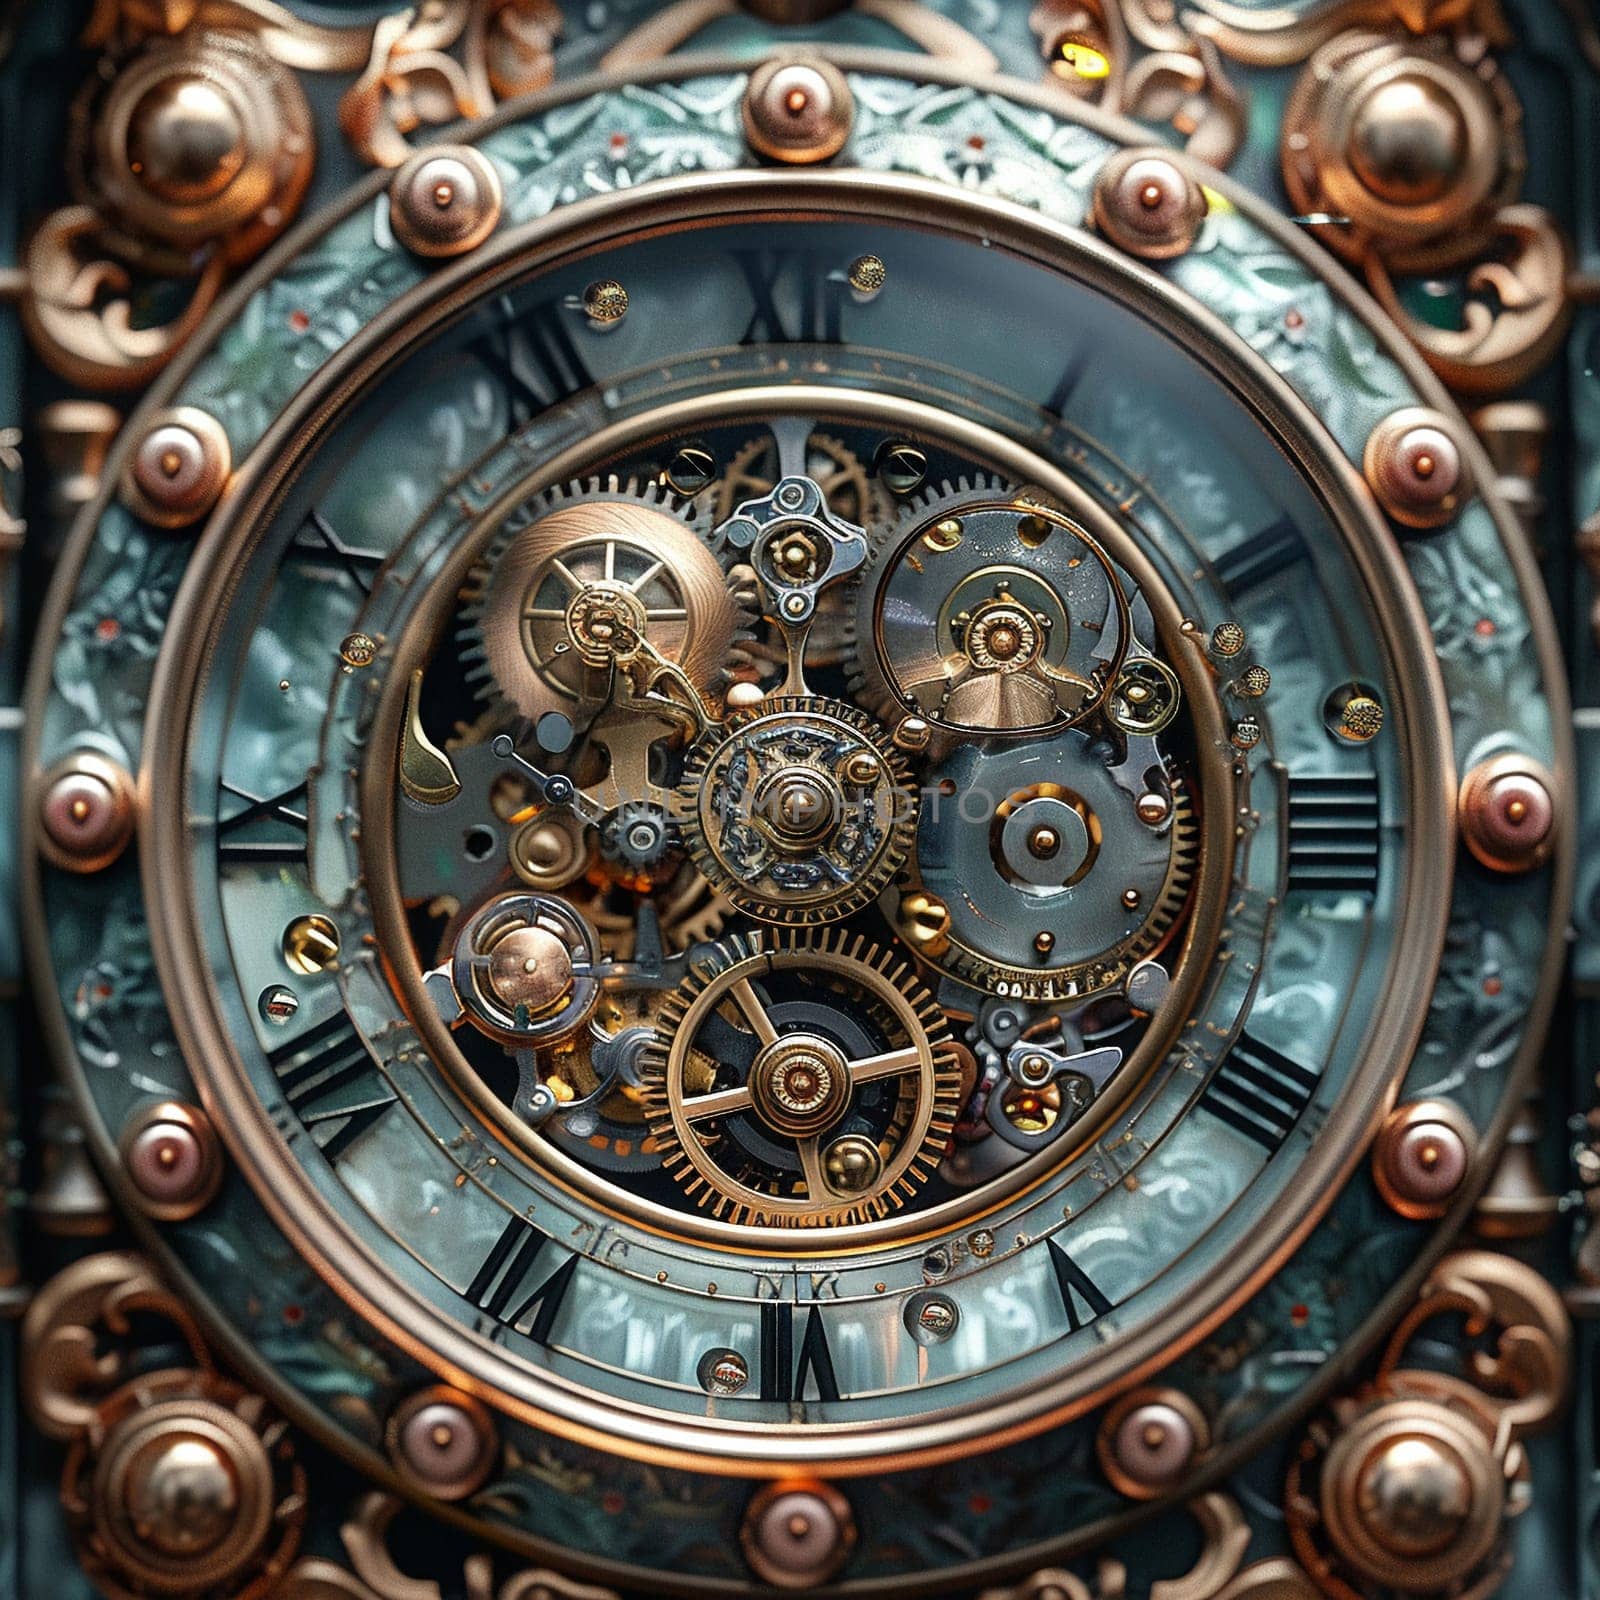 Ornate clockwork mechanism detailed in a steampunk illustration style with metallic sheen and gears. by Benzoix